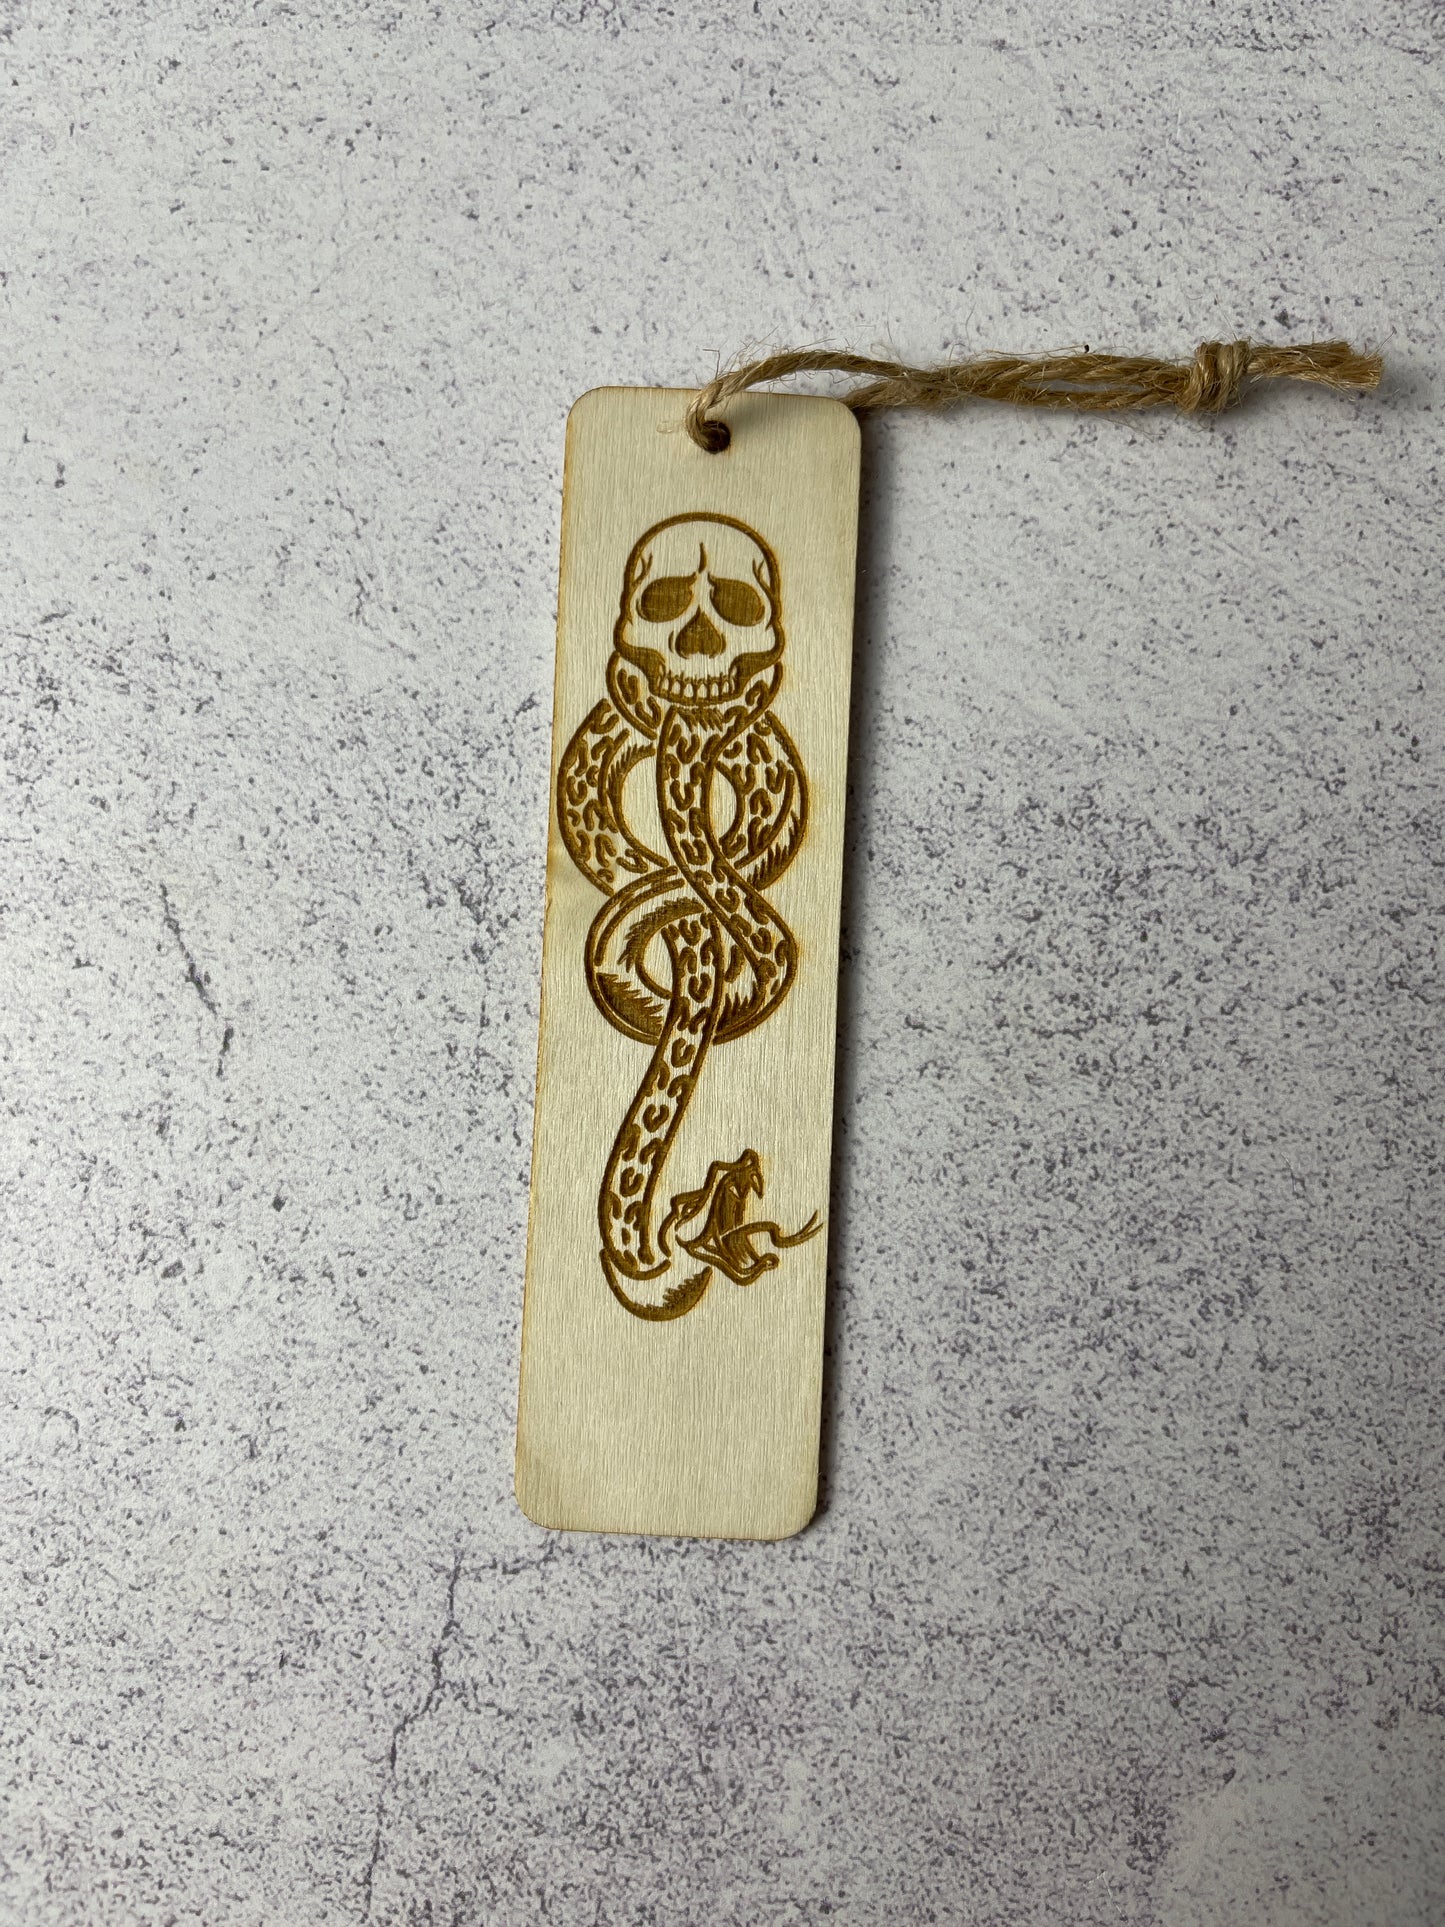 Wooden bookmarks